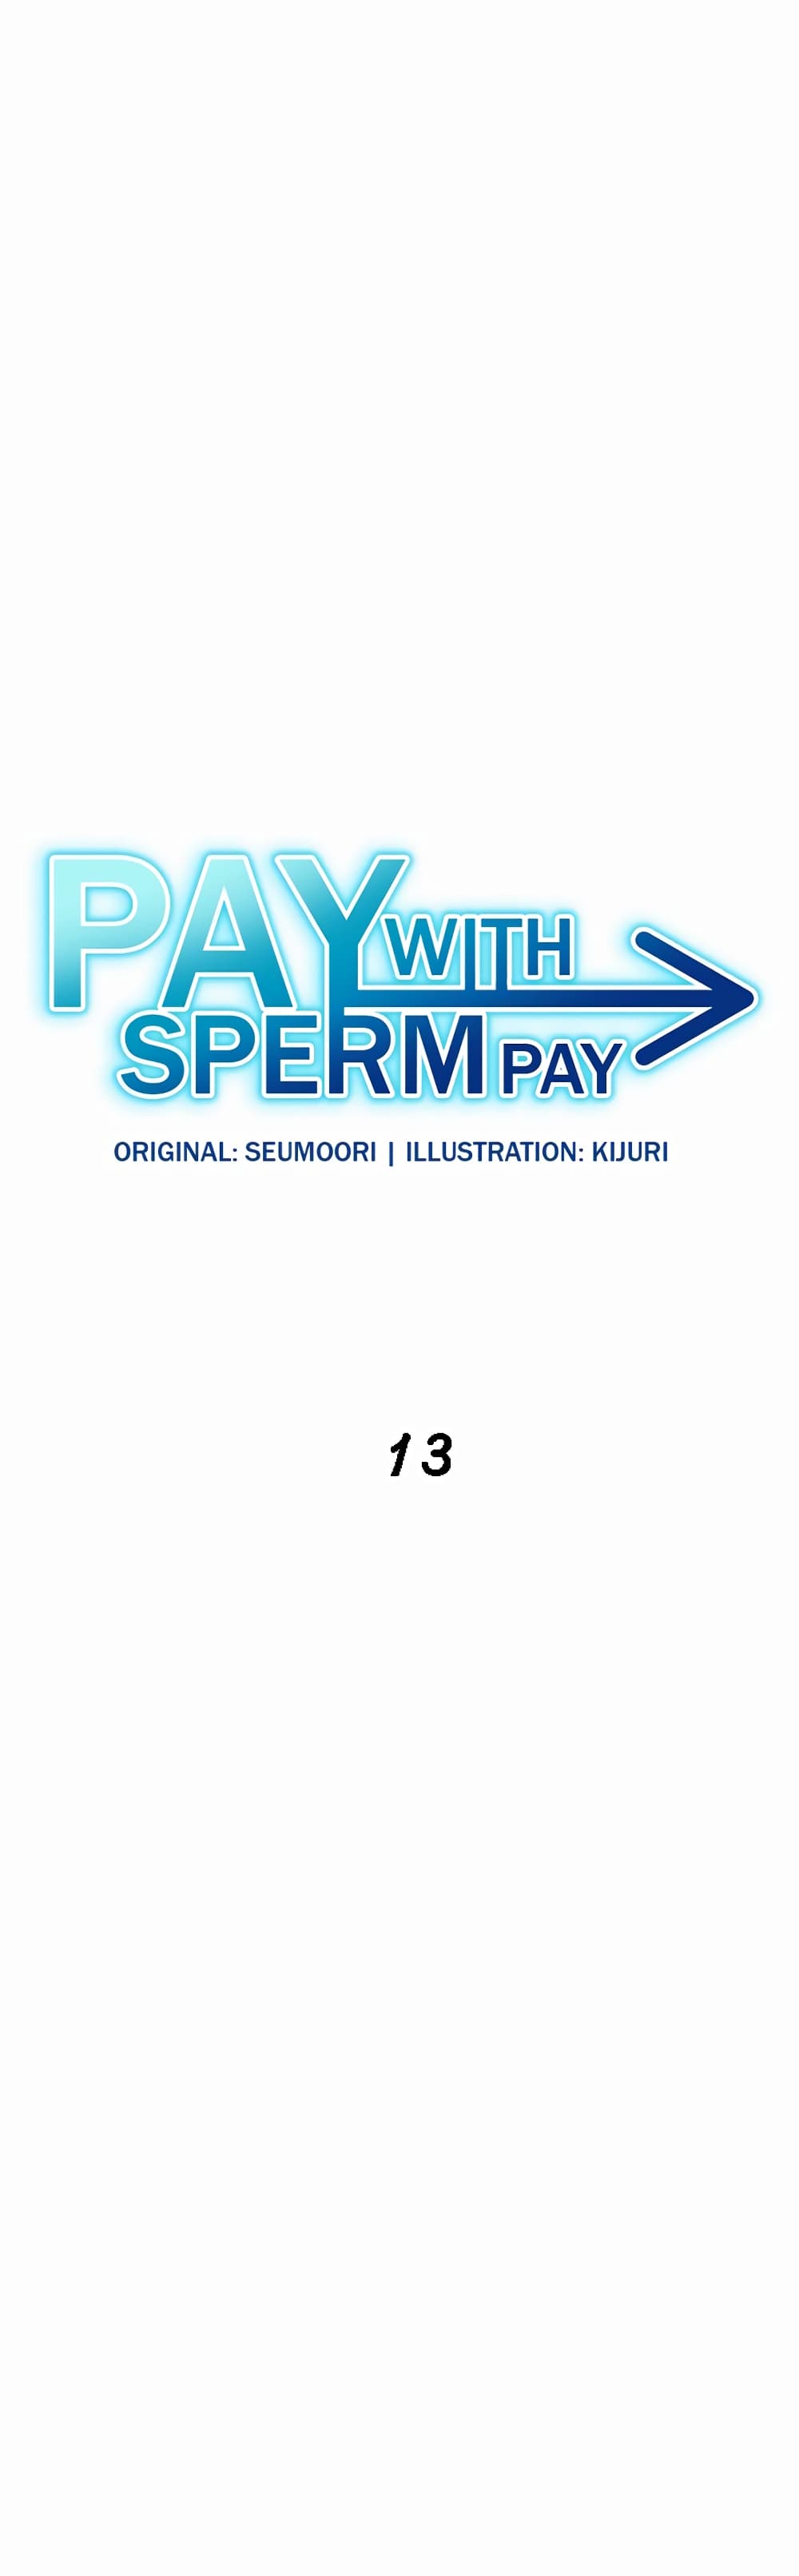 Pay with Sperm Pay 13-13